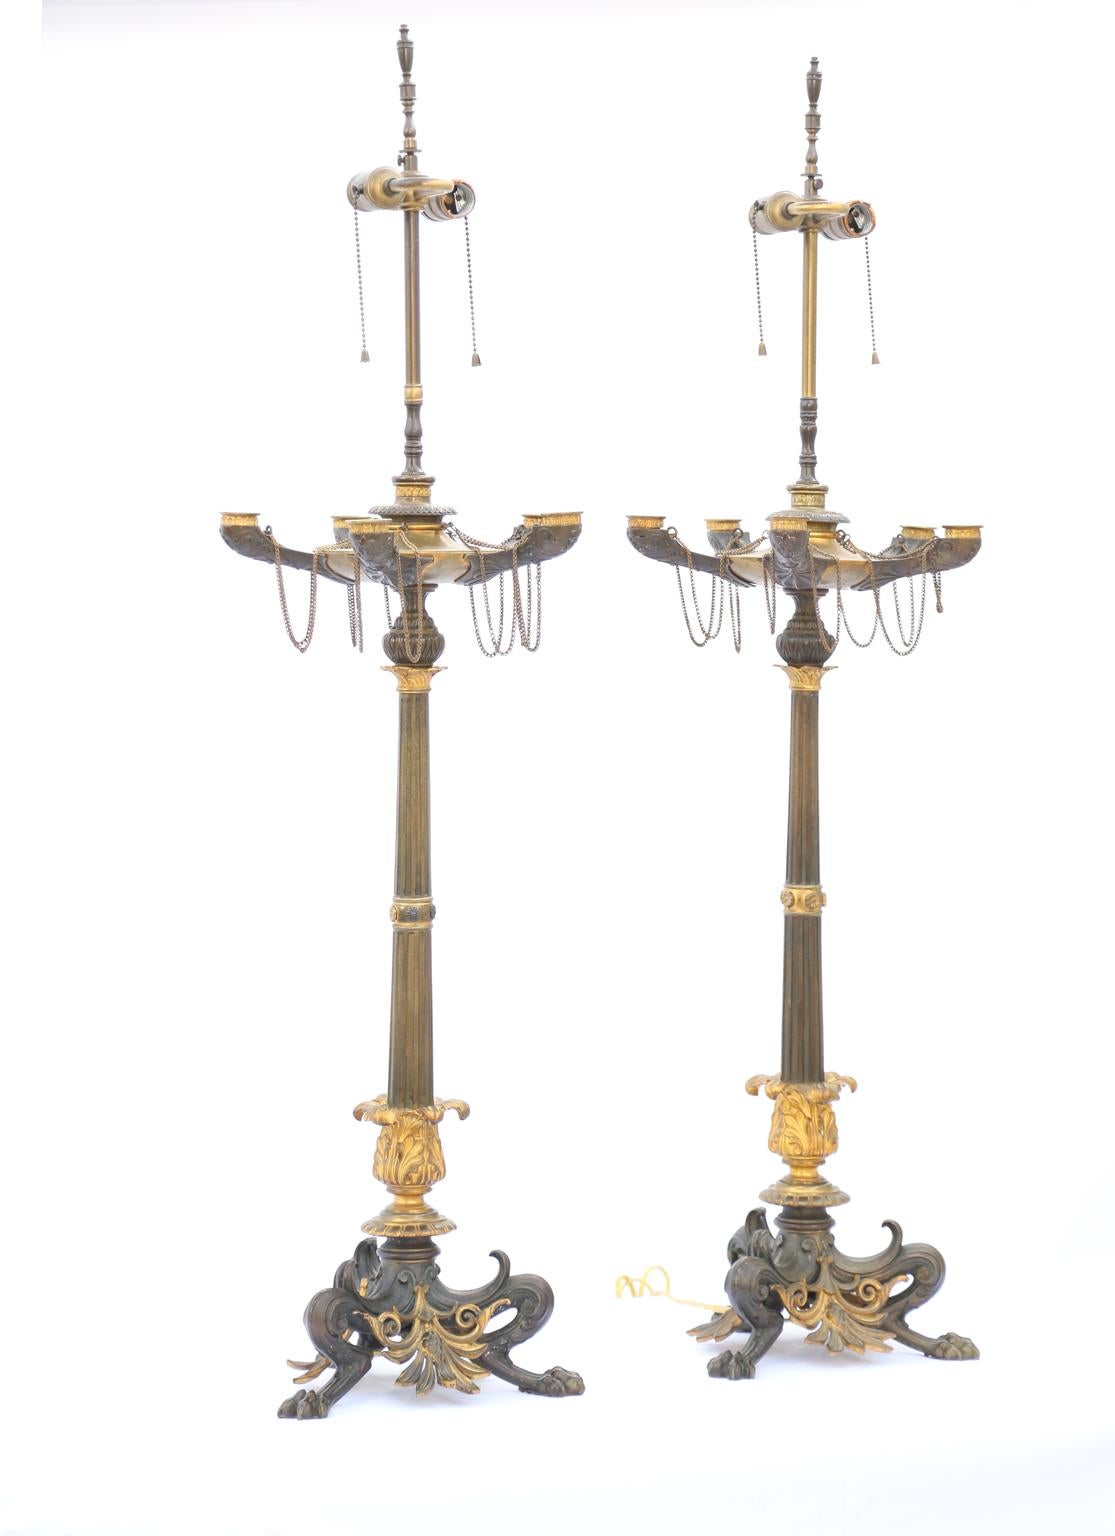 Pair of lamped candelabra, attributed to Ferdinand Barbedienne, finely cast of patinated and gilt bronze; having a triple hock-leg base with pad feet, decorated by pierced palmettes, topped by a fluted column, branching into a five candle pots with